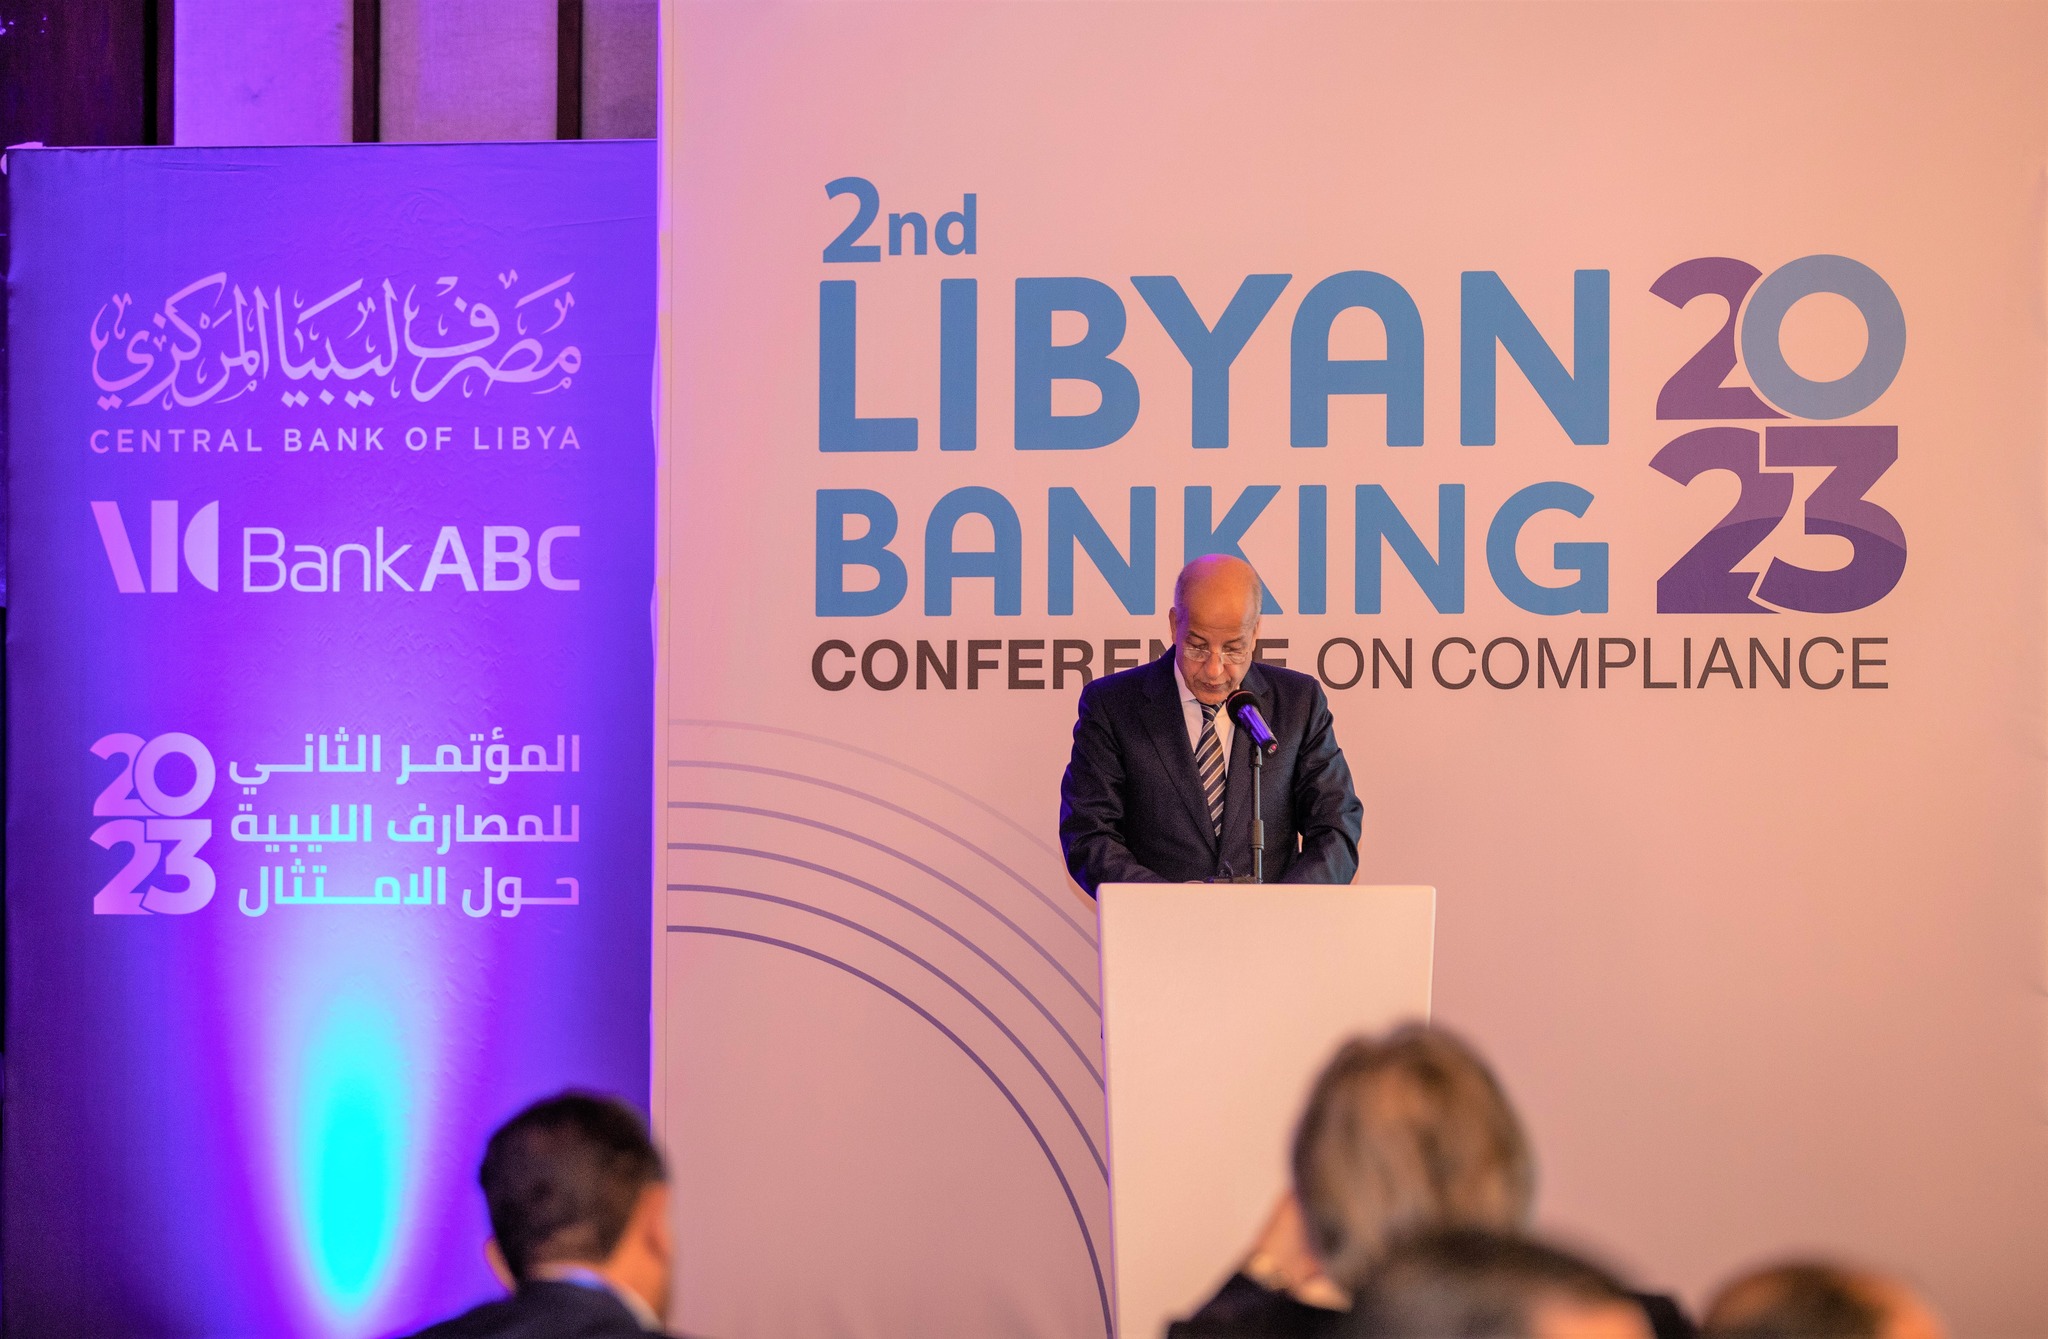 Central Bank of Libya organizes the second annual Libyan Banking Conference on Compliance